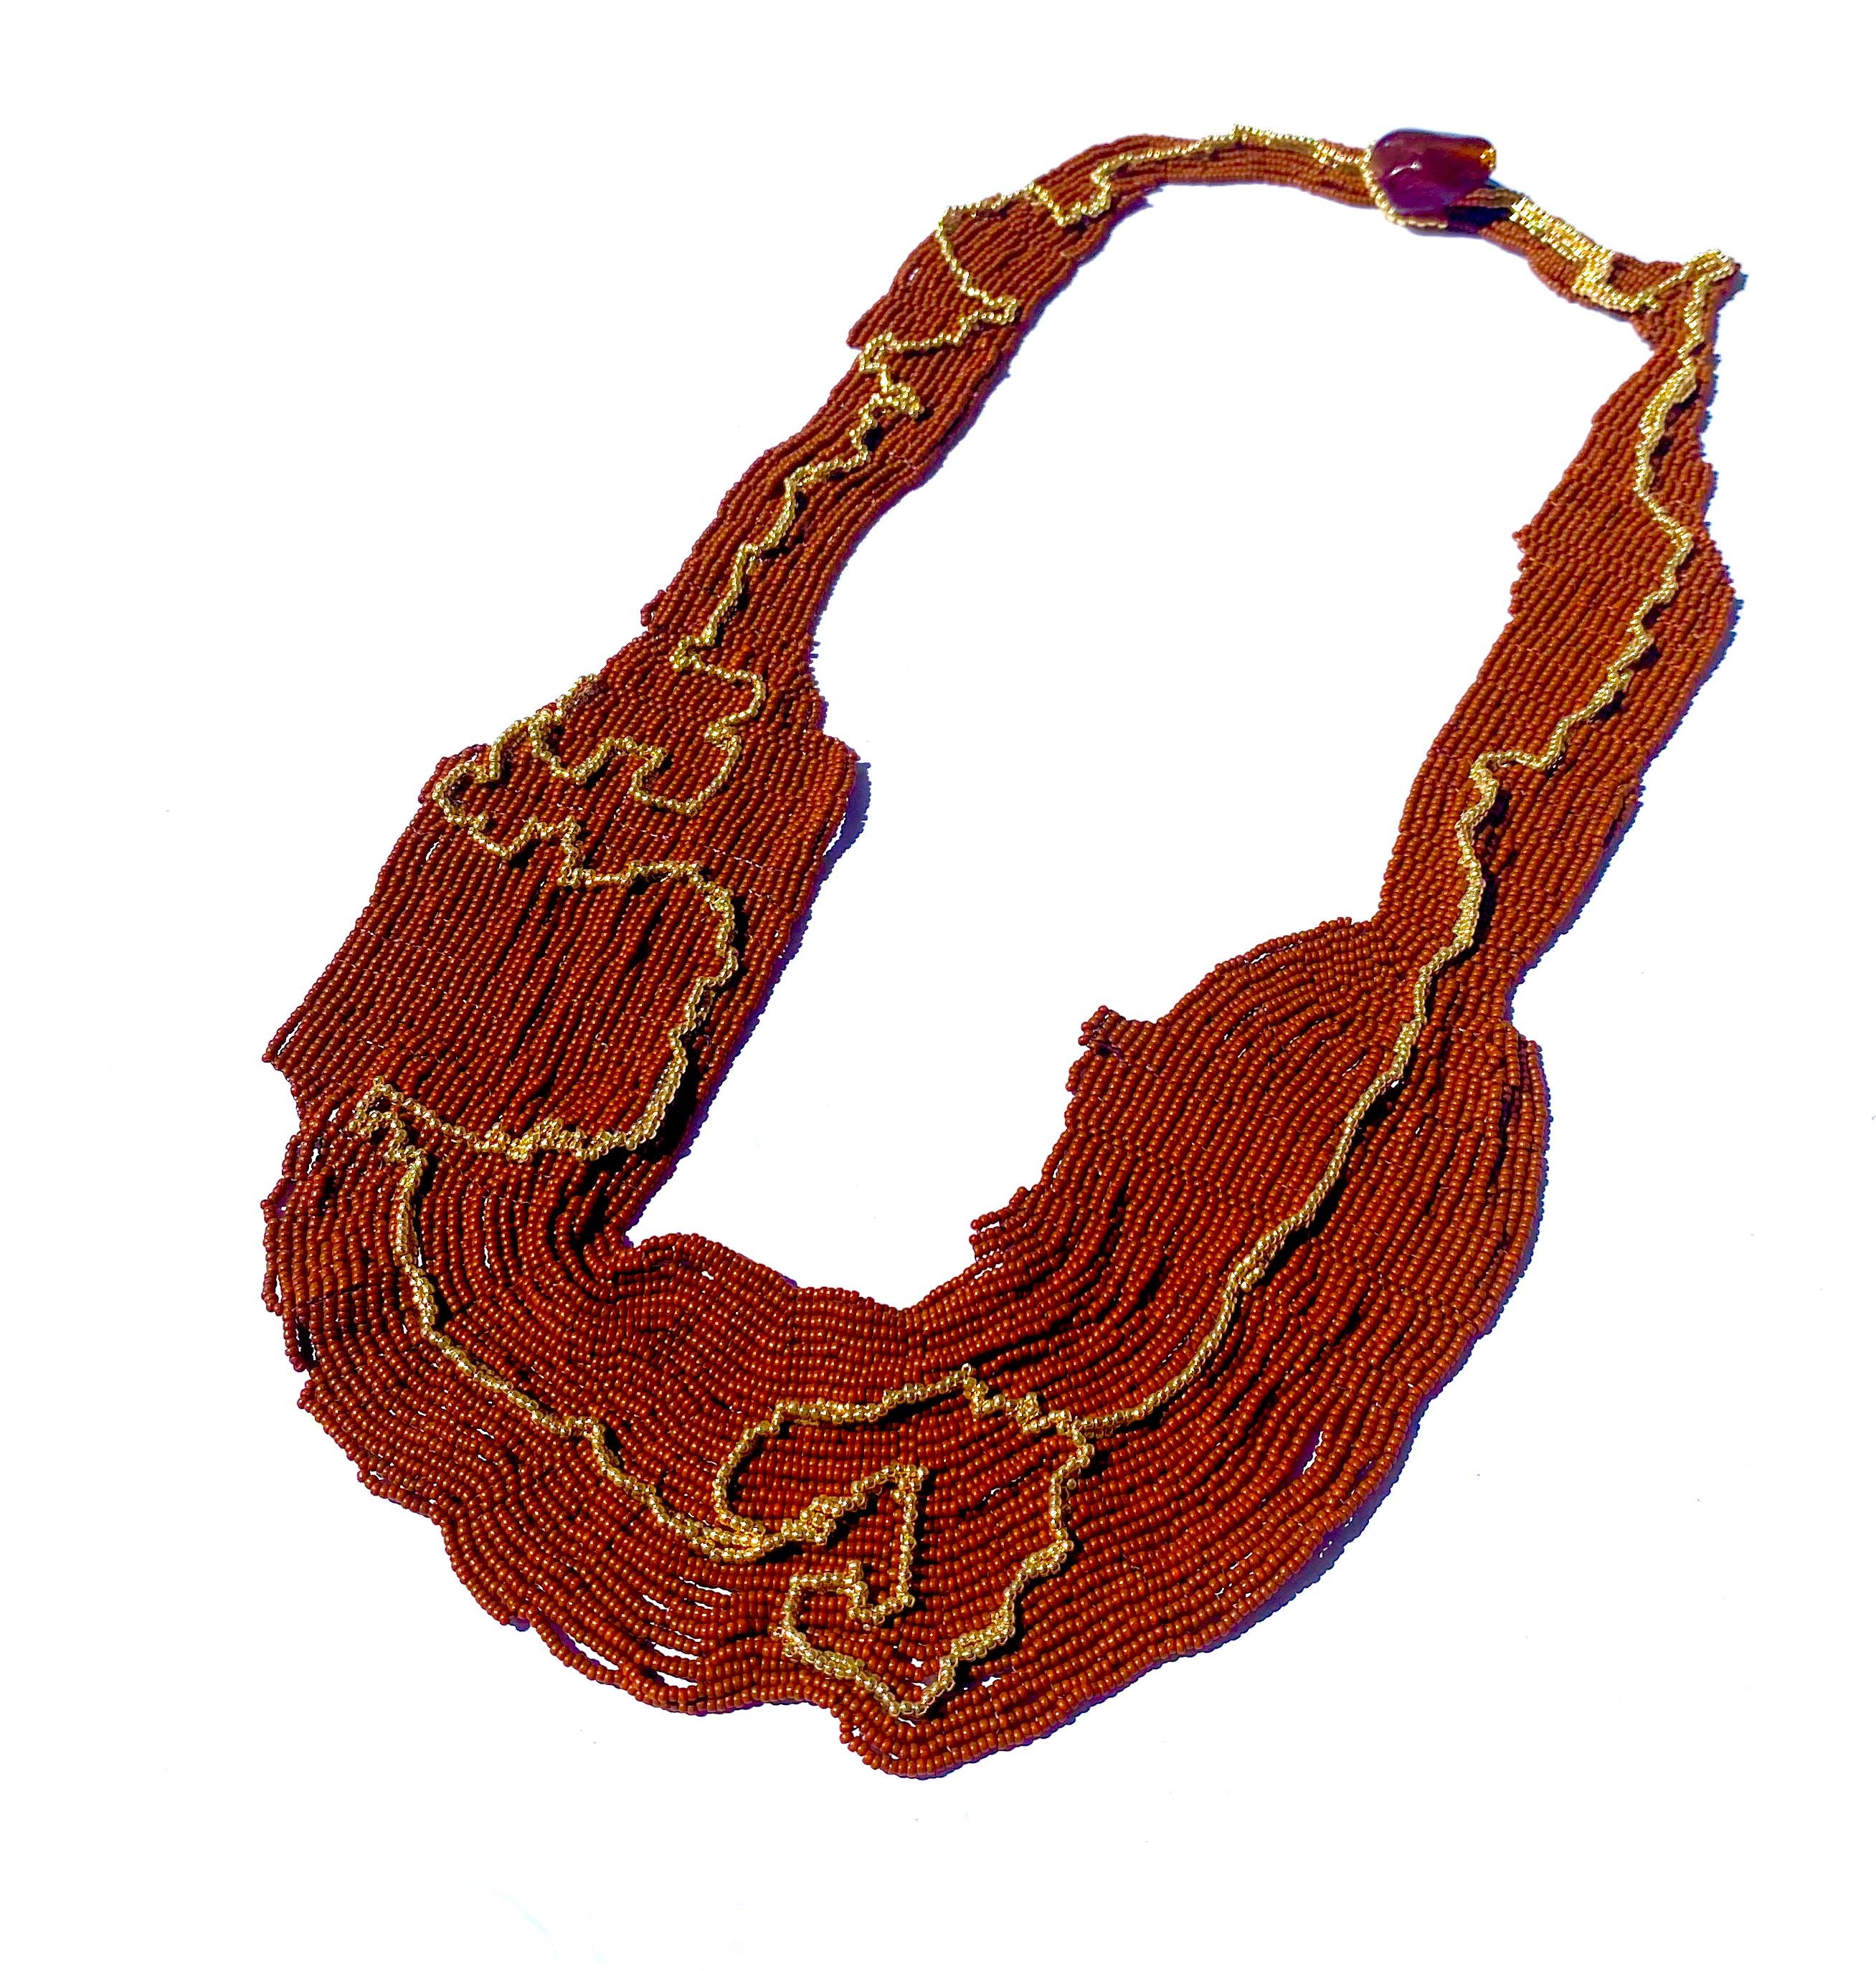 Handwoven permanent 14k gold plated seed beads with earthy terracotta brown Japanese glass seed beads woven over the period of 8 weeks in the largest and most significant piece of our catalogue. Gaia's Gold path is inspired on the twists and turns